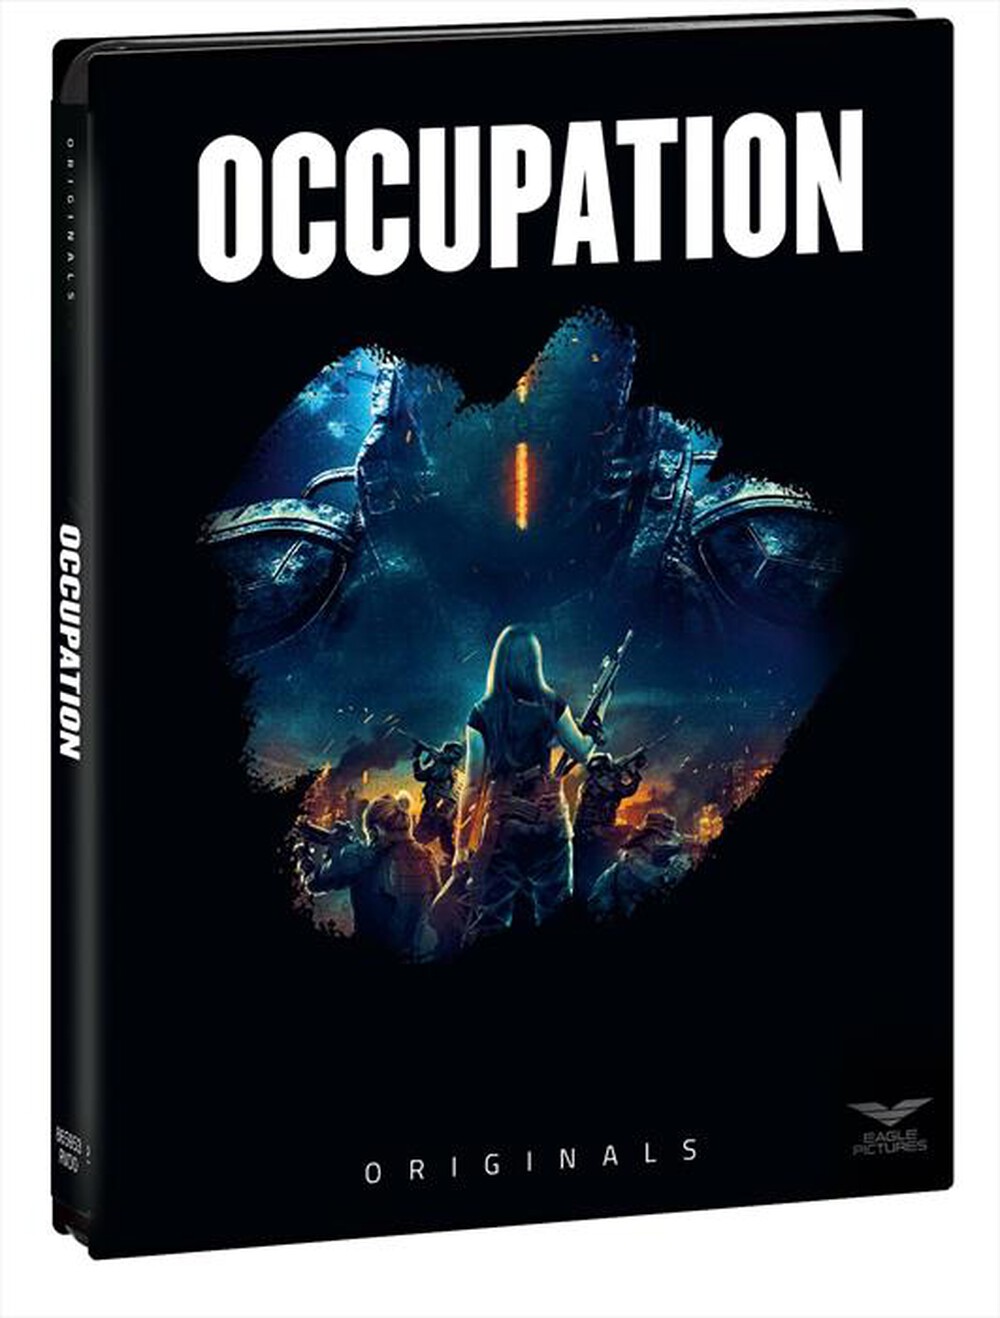 "EAGLE PICTURES - Occupation (Blu-Ray+Dvd) - "